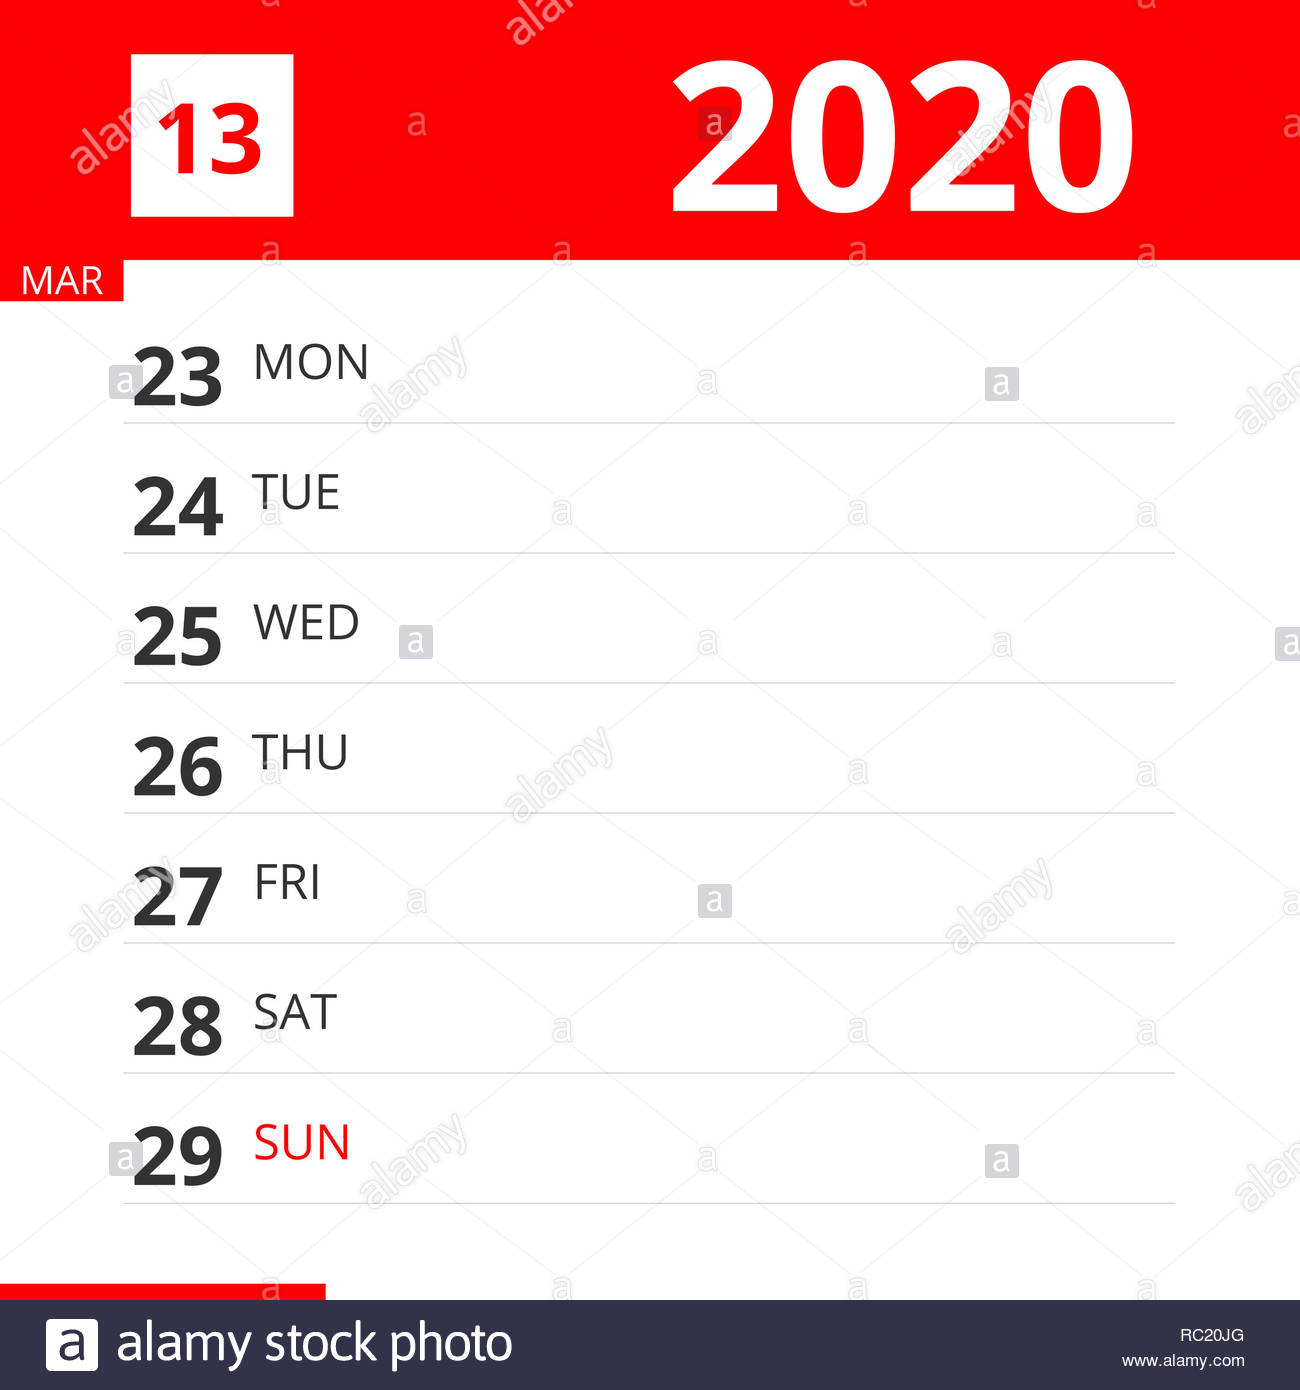 Calendar Planner For Week 13 In 2020, Ends March 29, 2020